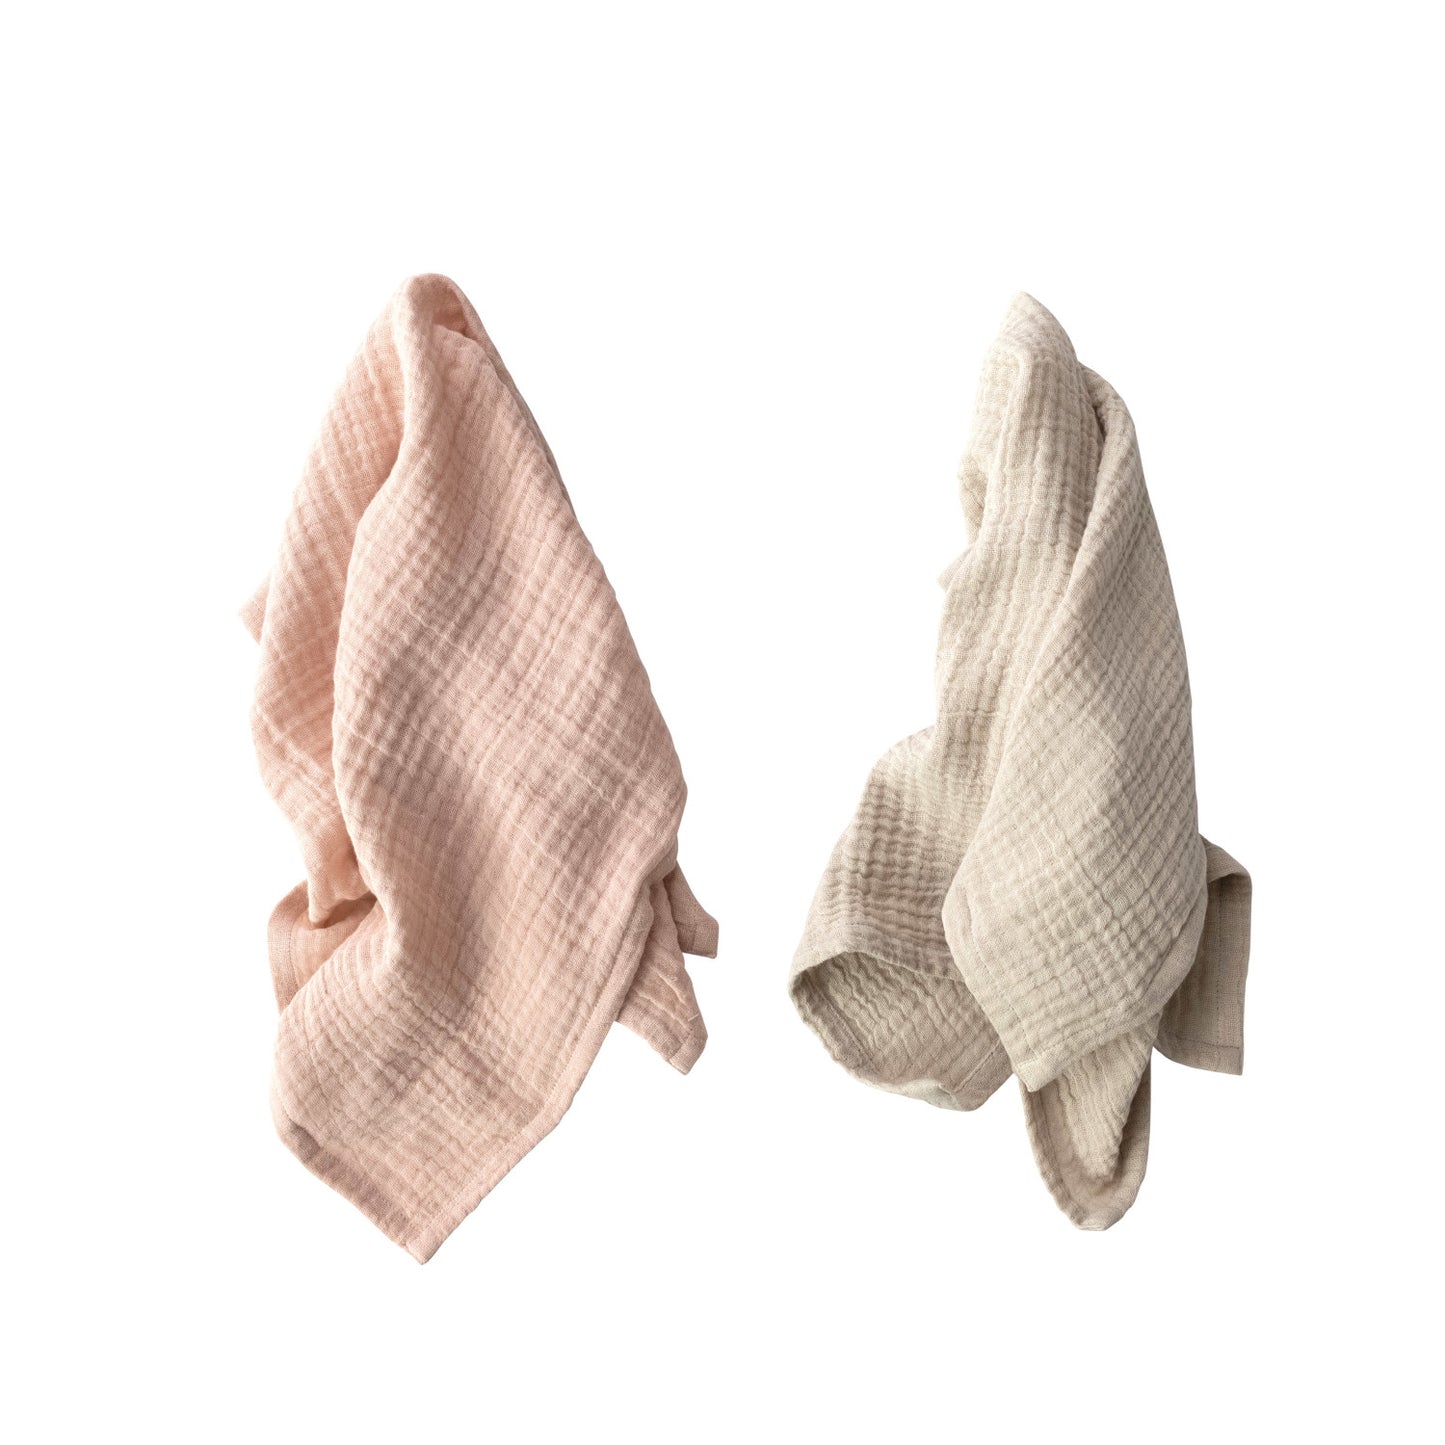 Cotton Double Cloth Tea Towels, Set of 2 in Bag